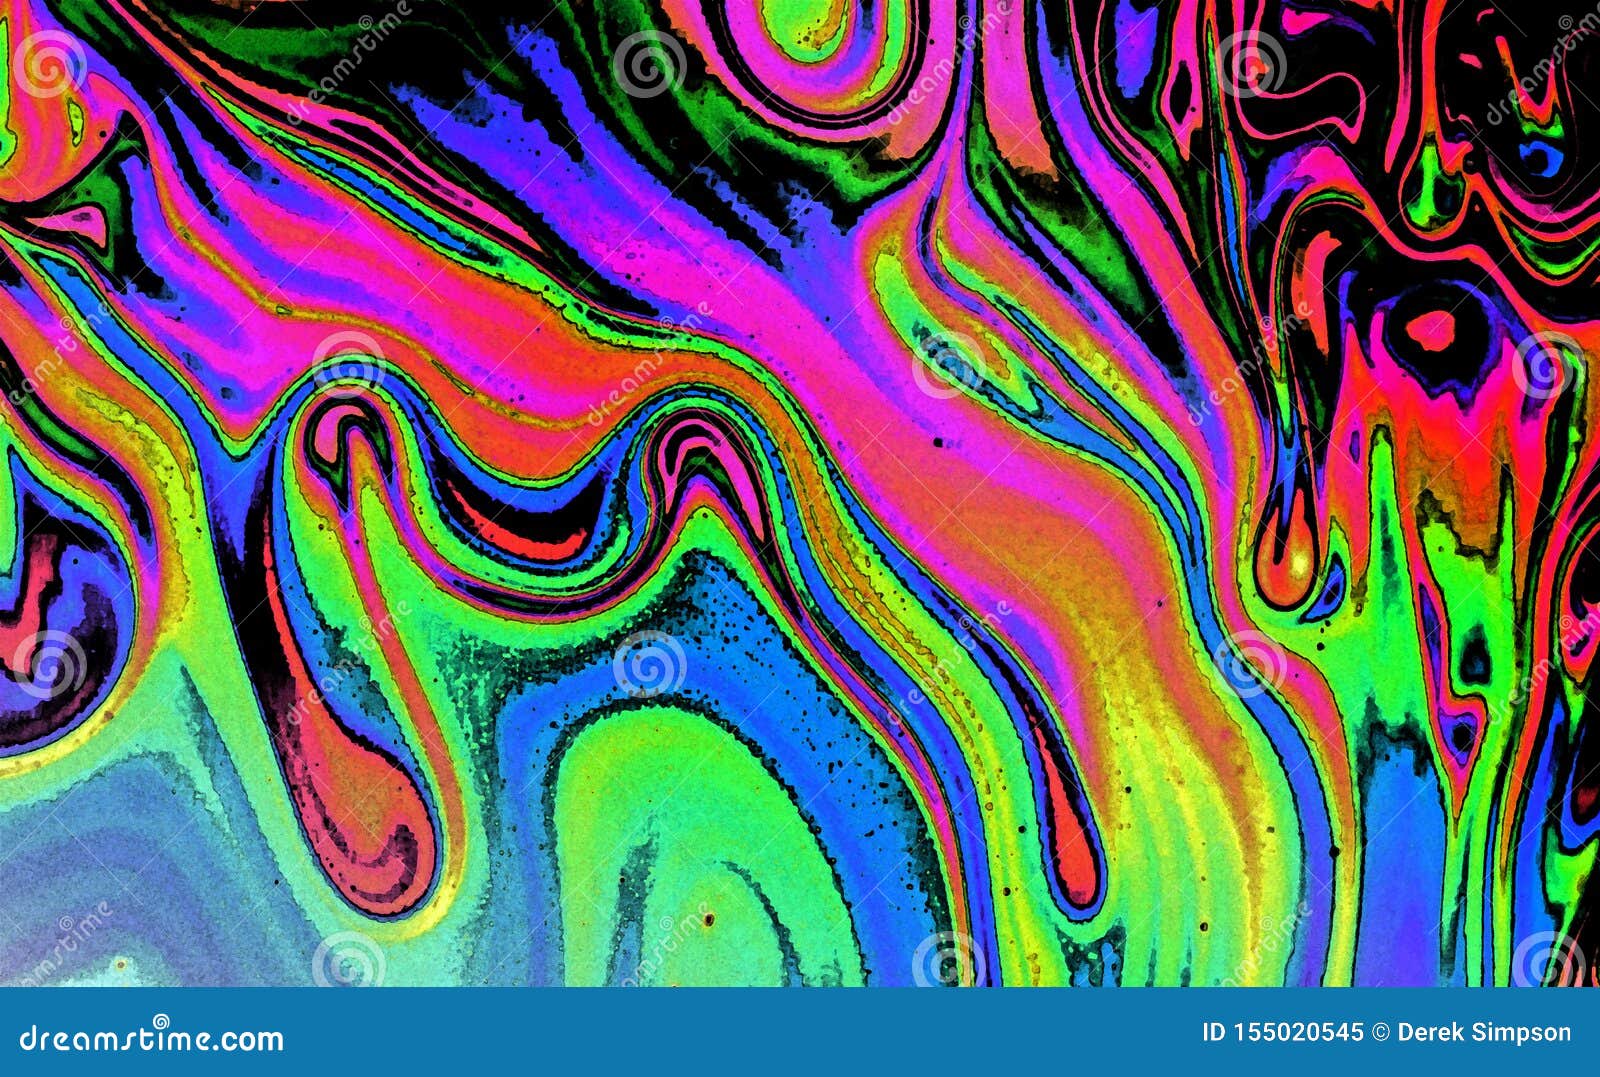 Vivid, Trippy Psychedelic Abstract Illustration Stock Image ...